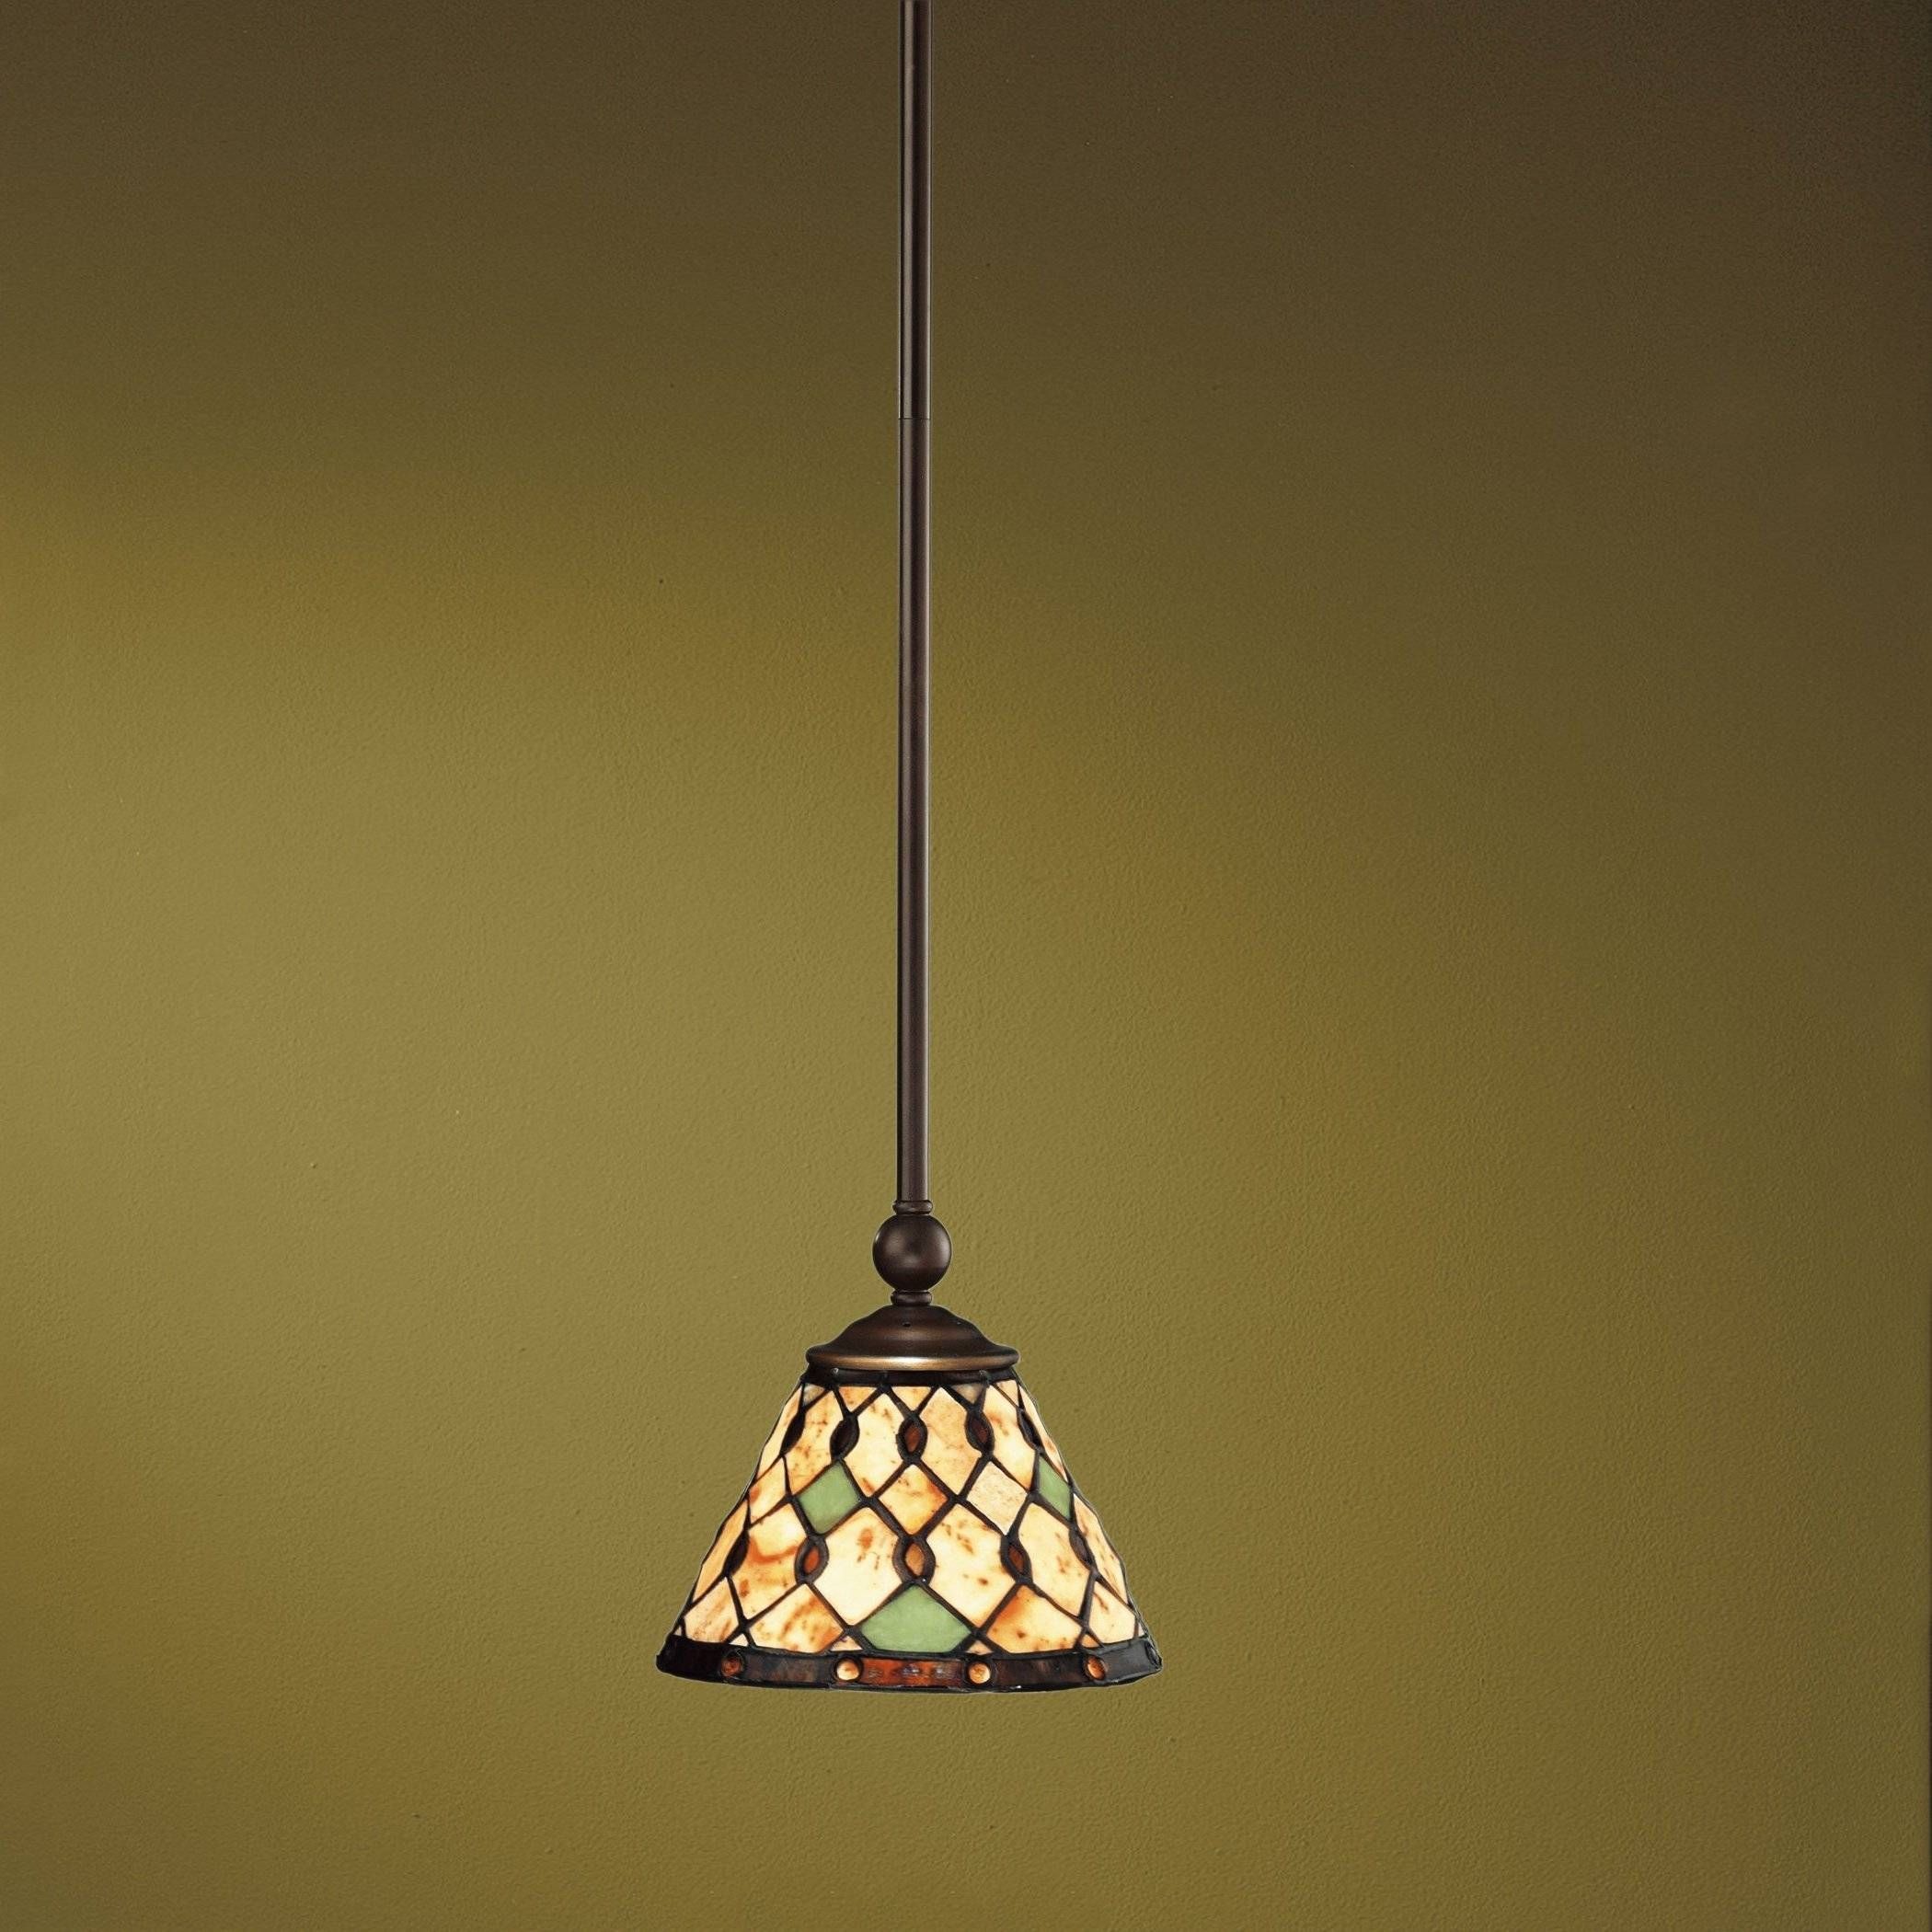 Tiffany Pendant Lamp – One Of The Most Loved Things To Add To A In Tiffany Pendant Light Fixtures (Photo 1 of 15)